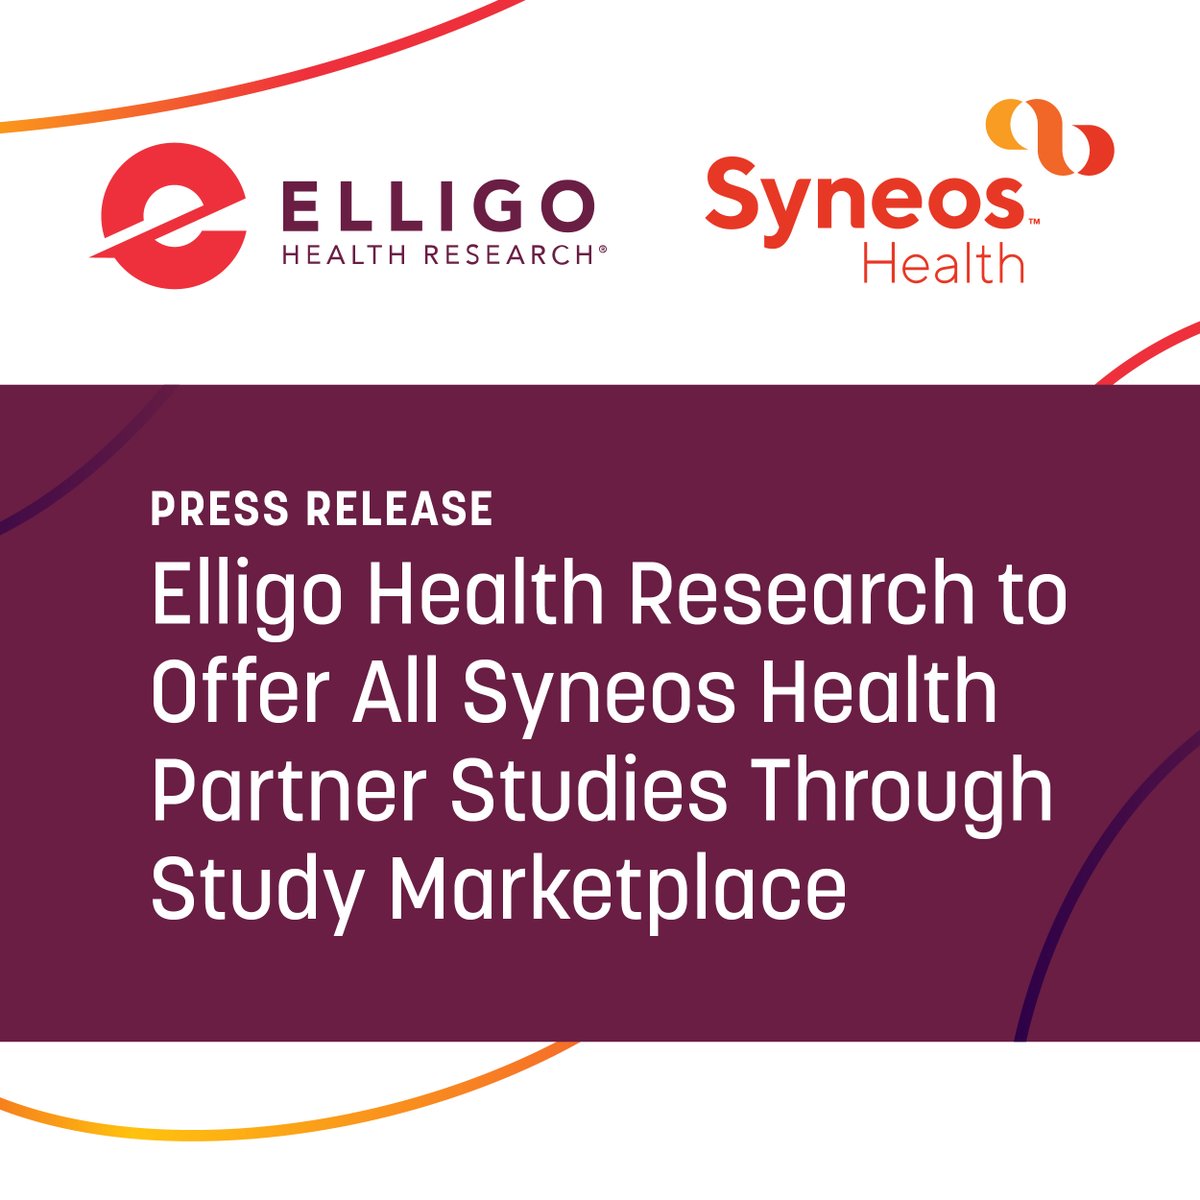 Today, we announced a new partnership with @SyneosHealth that is expanding access to available Syneos Health trials through Study Marketplace — increasing efficiencies for #clinicalresearch. Here are the details: ow.ly/WFGn50PTAlo